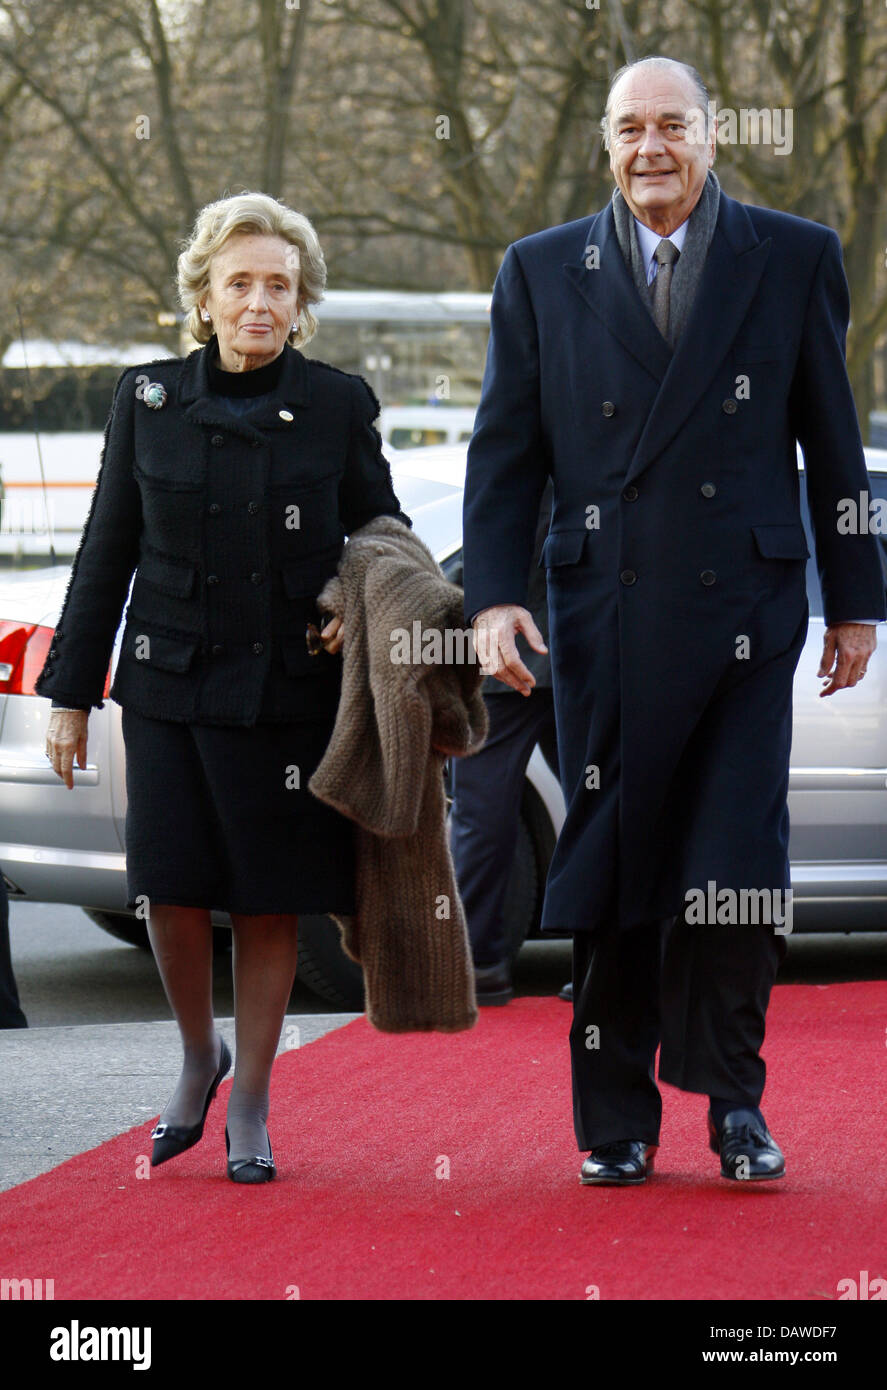 The French Prime Minister Jacques Chirac and his wife Bernadette Chodroarrive at a celebration on the occasion of the 50th anniversary of the Treaty of Rome in Berlin, 24 March 2007. Photo: Johannes Eisele Stock Photo